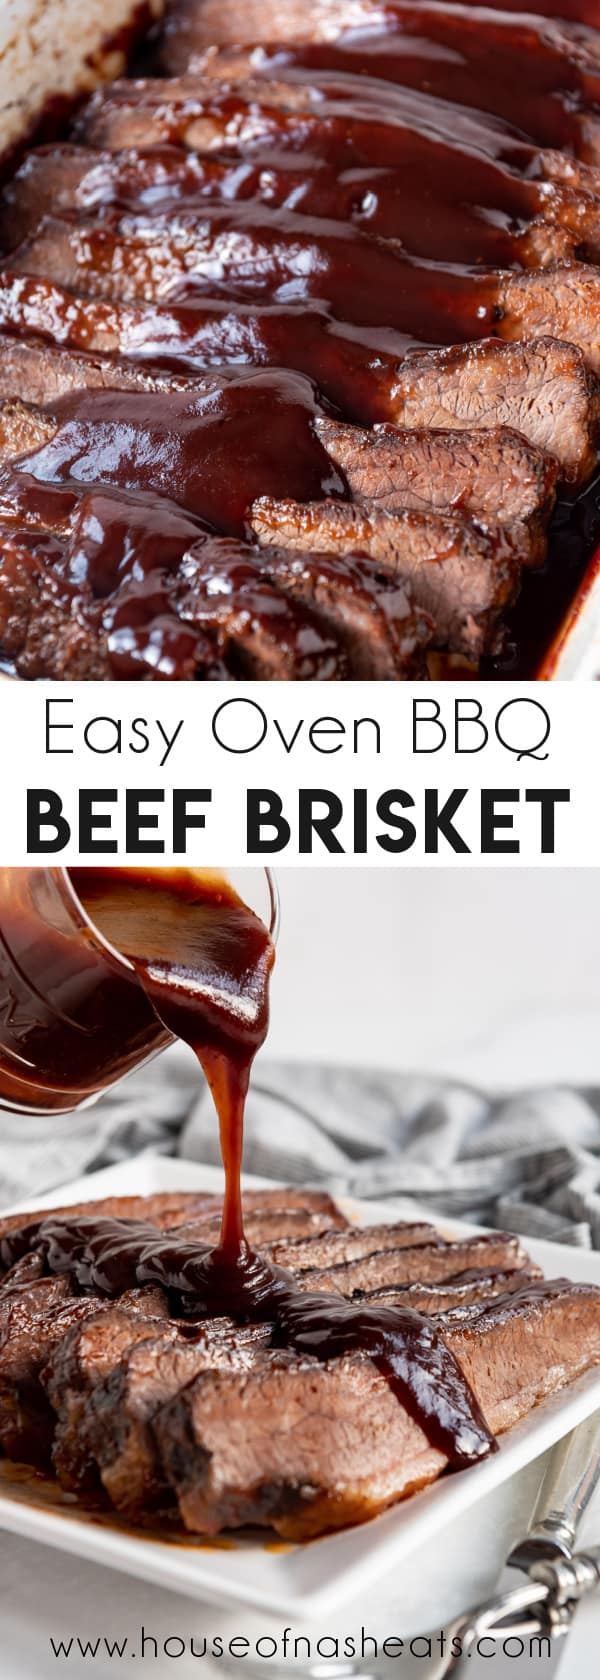 A collage of bbq beef brisket images with text overlay.